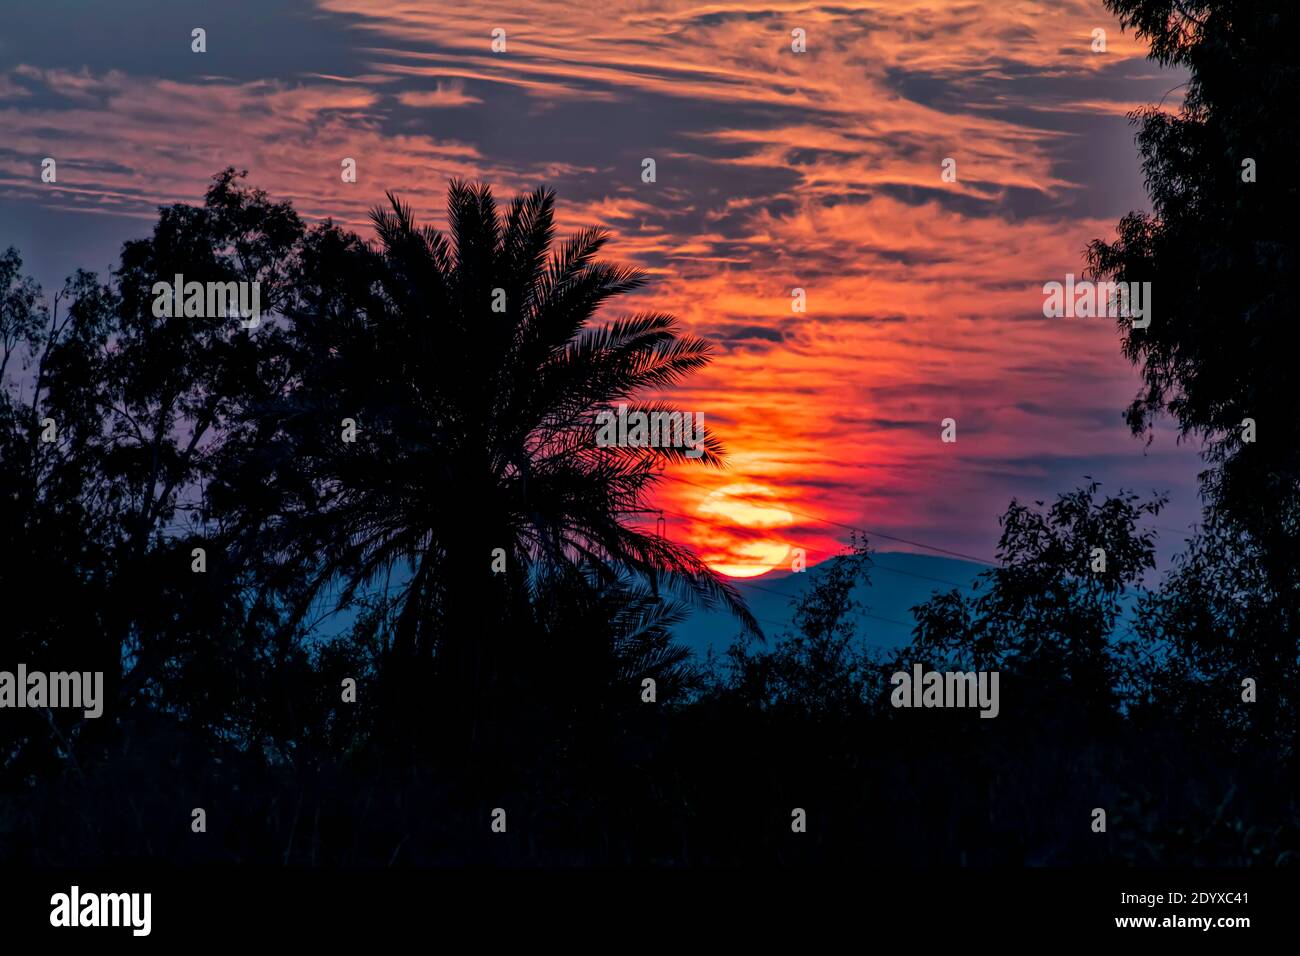 Scenic sunset in the sky with clouds and silhouettes of palm trees in the foreground Stock Photo